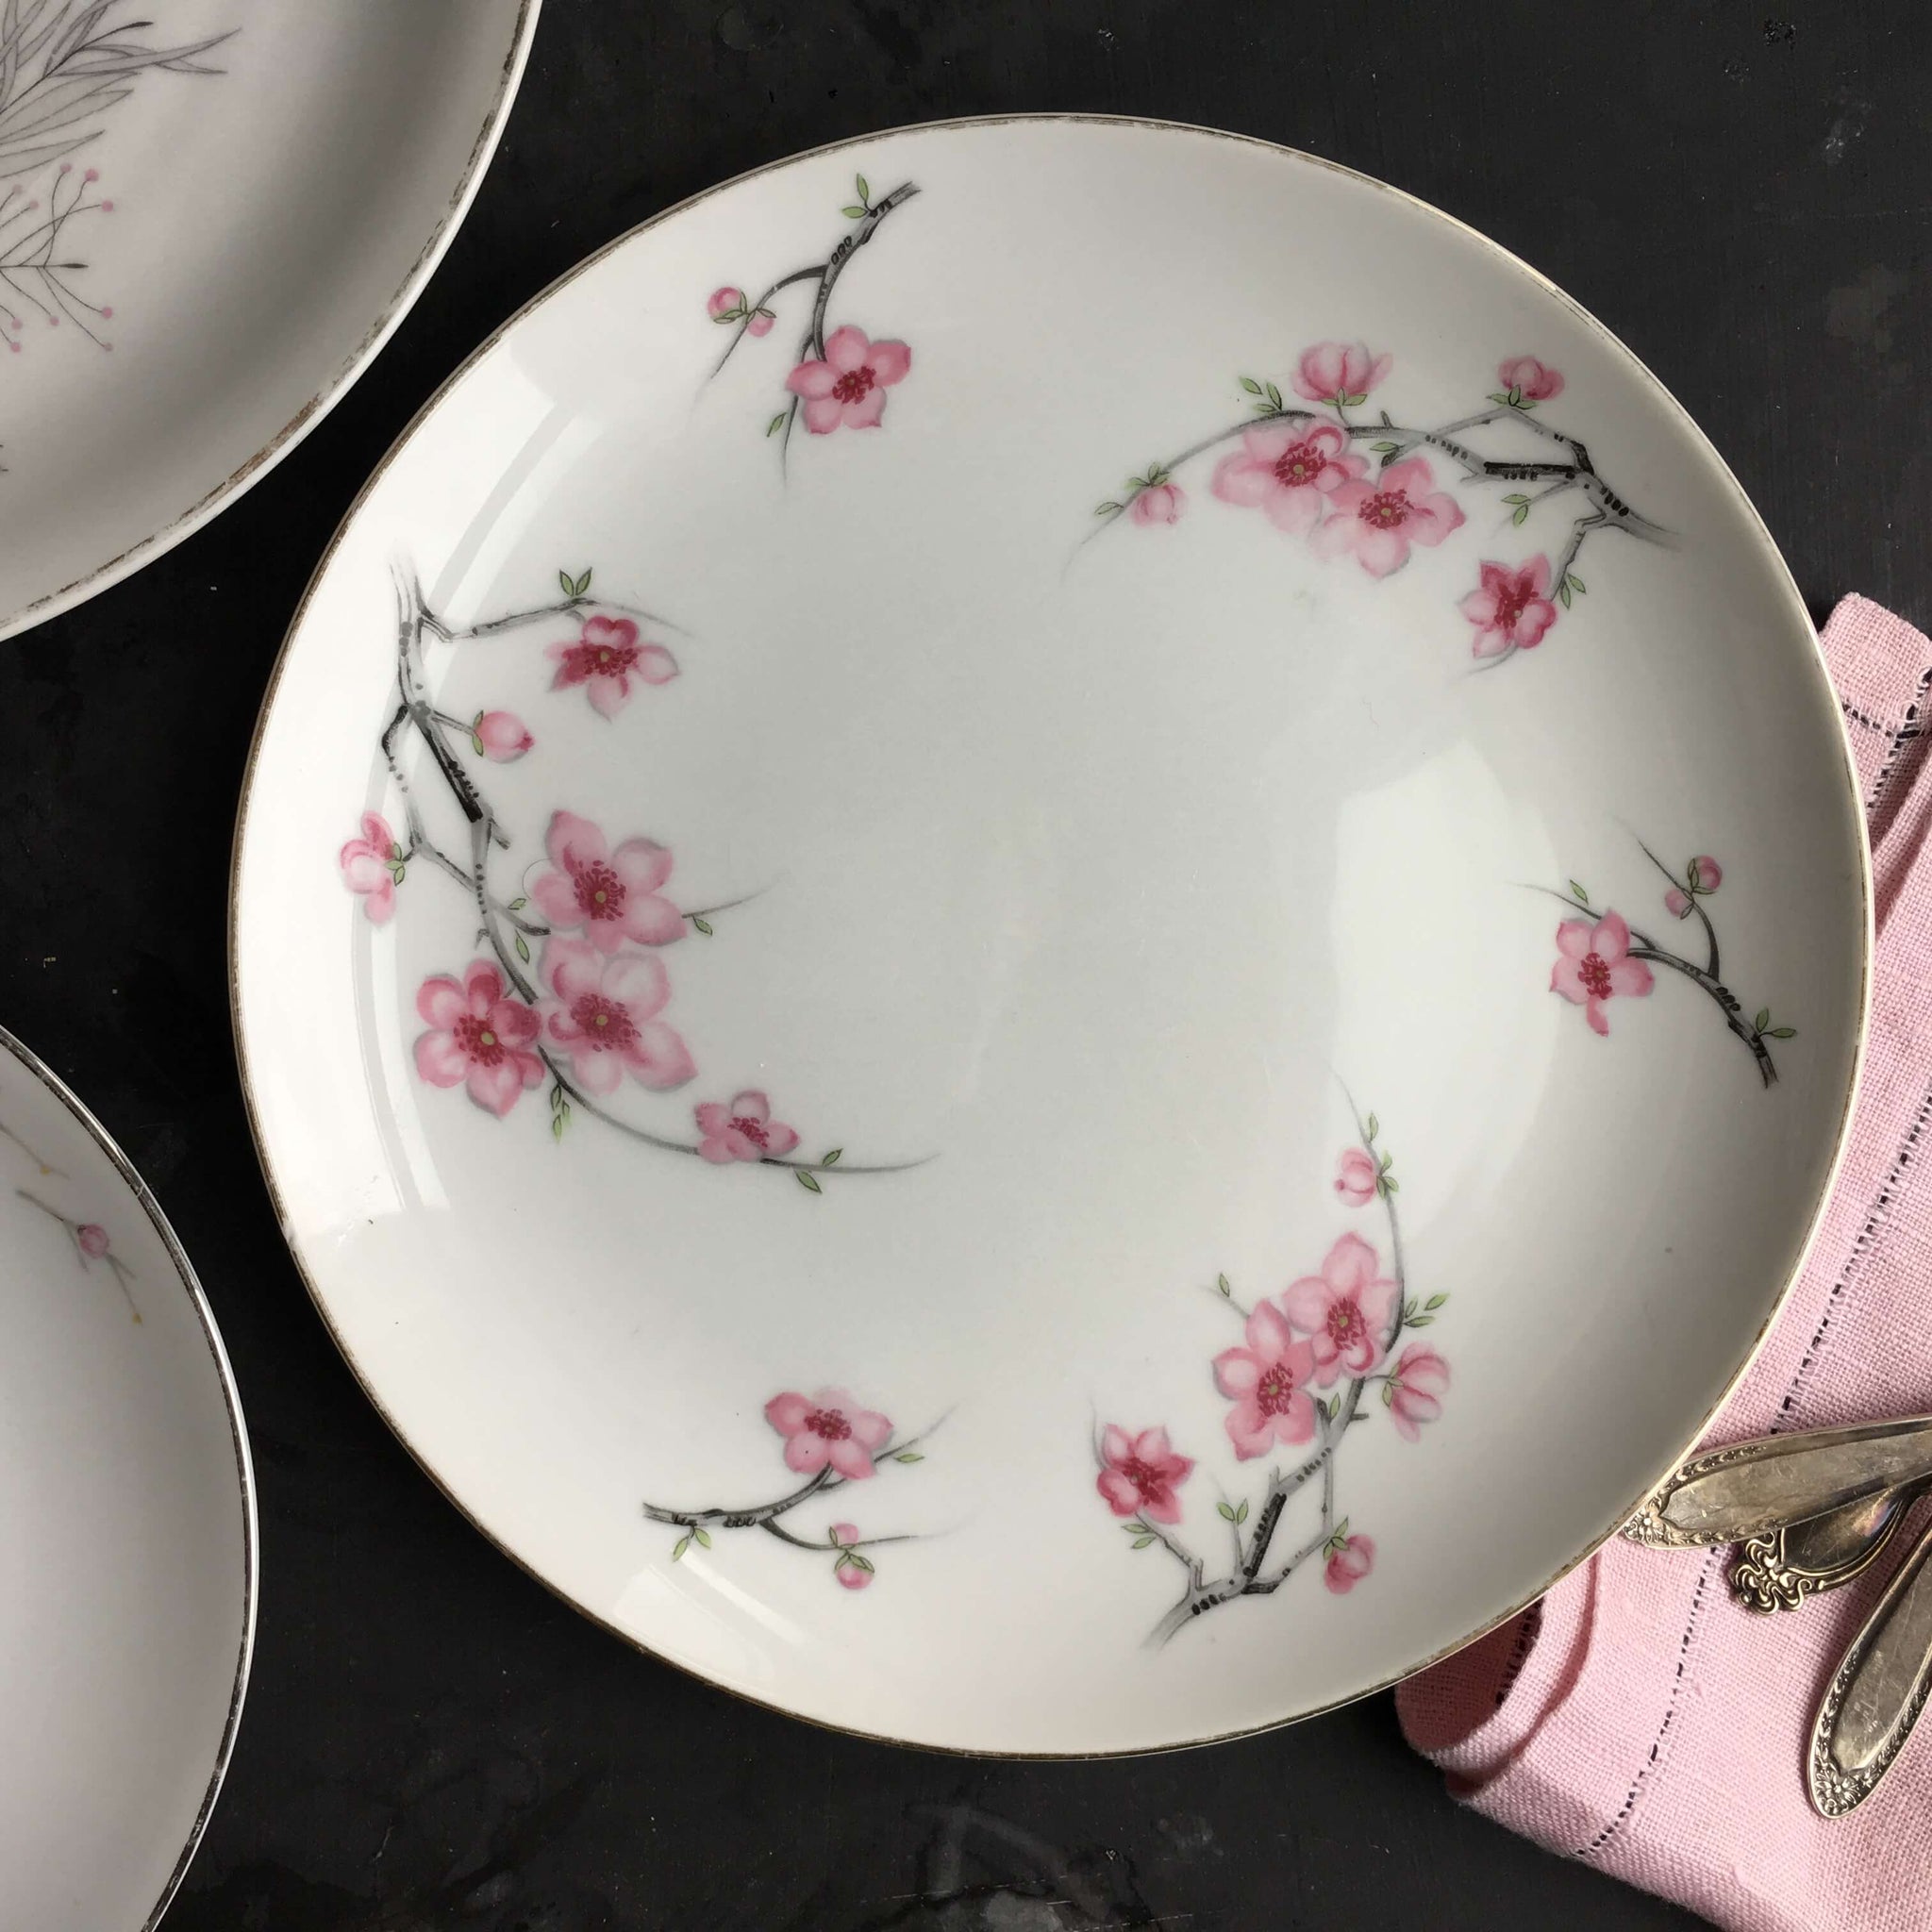 The Cherry Blossom Collection - Vintage Mix and Match Grey and Pink Floral Plates - Set of Three